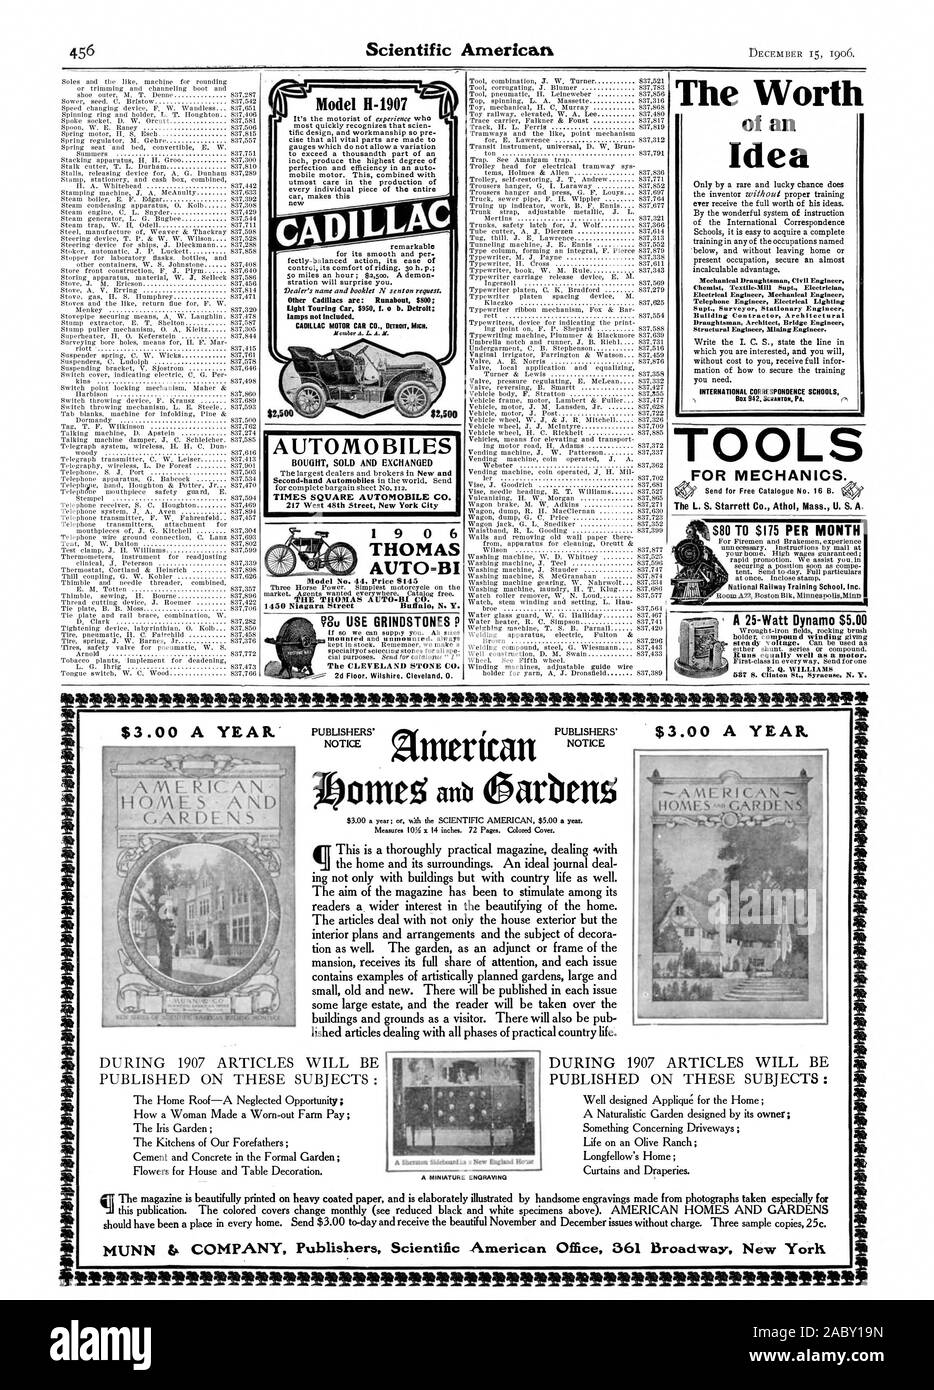 Model -1907 The Worth of an Idea INTERNATIONAL CORRESPONDENCE SCHOOLS TOOLS FOR MECHANICS. The L. S. Starrett Co. Athol Mass. U. S. A. A 25-Watt Dynamo $5.00 BOUGHT SOLD AND EXCHANGED TIMES SQUARE AUTOMOBILE CO. 1 9 0 6 AUTO=BI $80 TO $175 PER MONTH $3.00 A YEAR.' $3.00 A YEAR. NOTICE Ztmerican NOTICE A MINIATURE ENGRAVING MUNN to. COMPANY Publishers Scientific American Office 361 Broadway New York ittOSSISISteiMititStitttit9999S999999990VIIINt22ttiMitit2S, 1906-12-15 Stock Photo